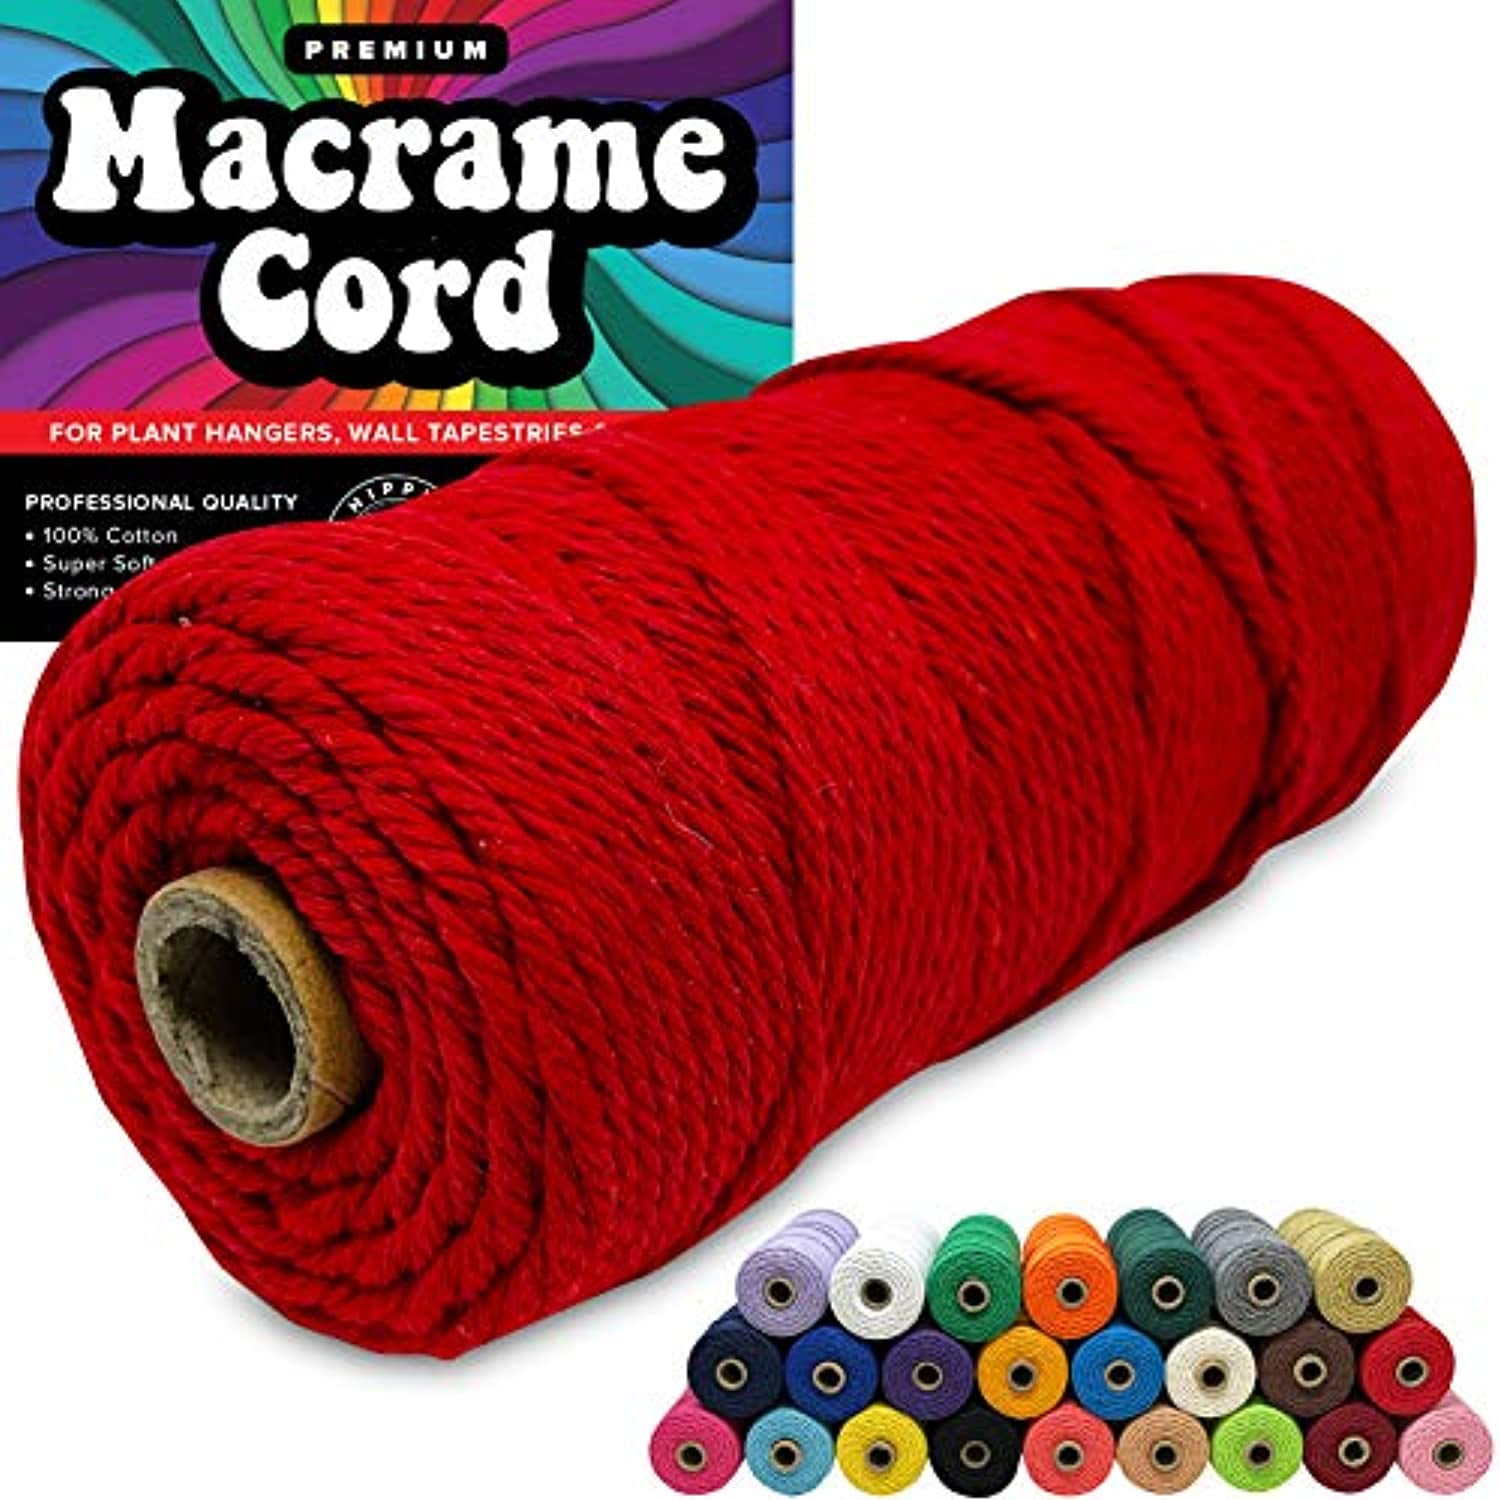 Binwat Macrame Cord Natual Macrame Cotton Cord DIY Craft Cord Spool Twine Rustic String Cotton Rope for Wall Hanging,Plant Hangers,Crafts,Knitting,Decorative Projects 3mm x100m Red Wine